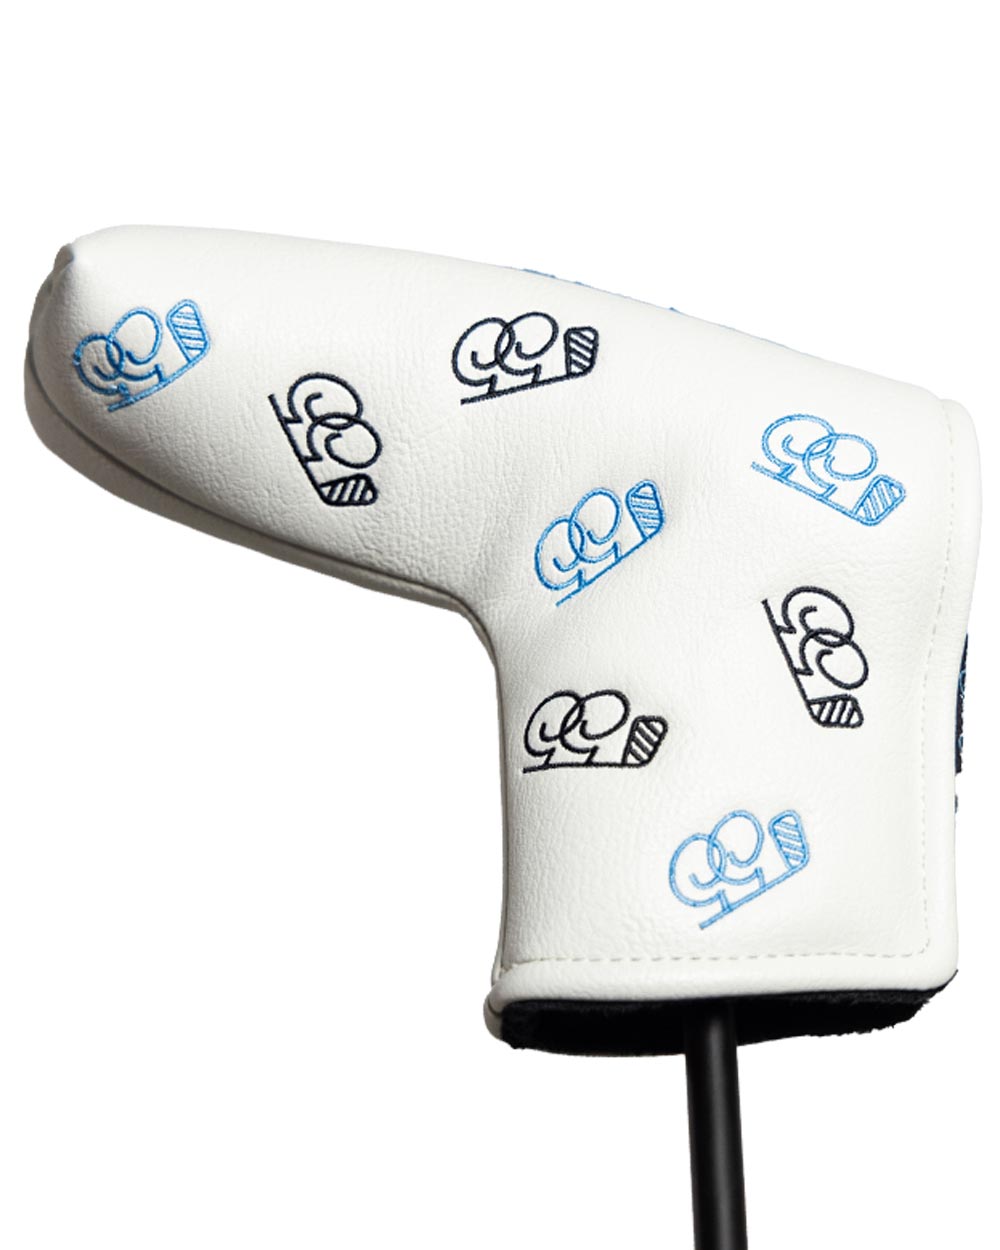 goodgood_superstroke-blackout-putter_cover_pdp-1.jpg__PID:7aa407a0-f3c0-4963-a146-6bc98e78a627